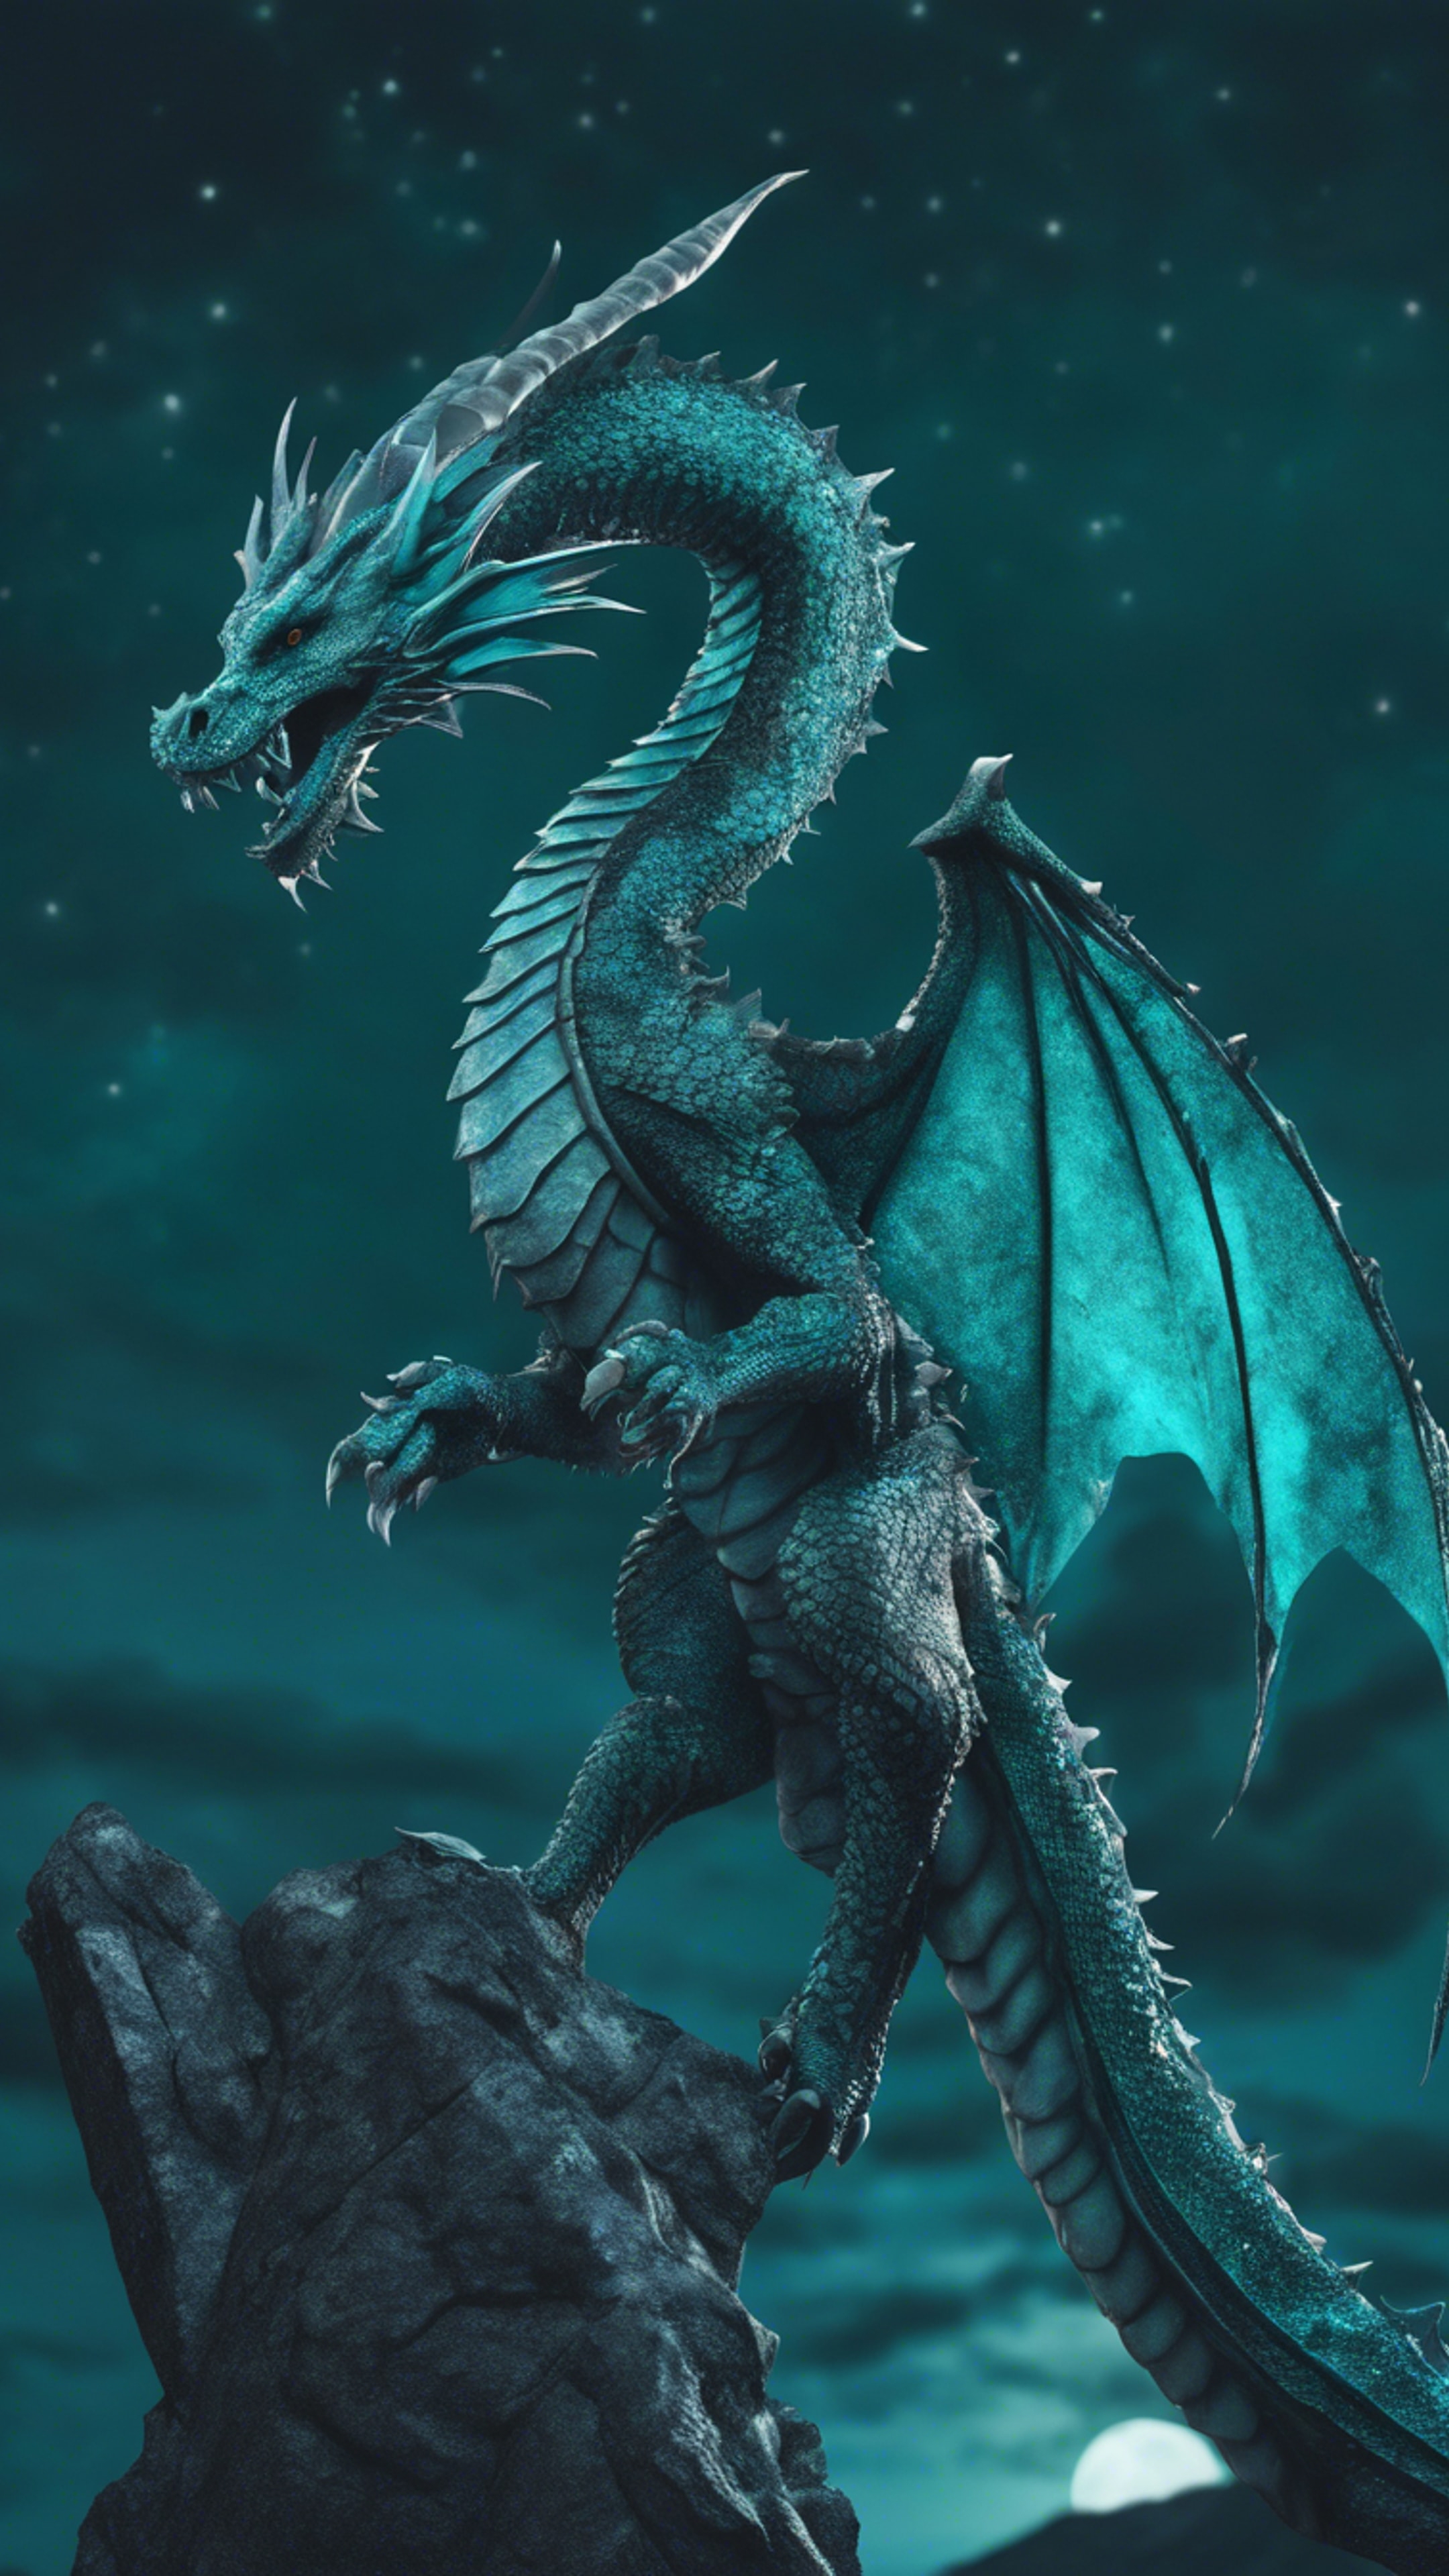 A serpentine Gothic dragon perched on a tall mountain, its teal scales shimmering under the moonlight. 墙纸[91ef634c137e4b1f8ab5]